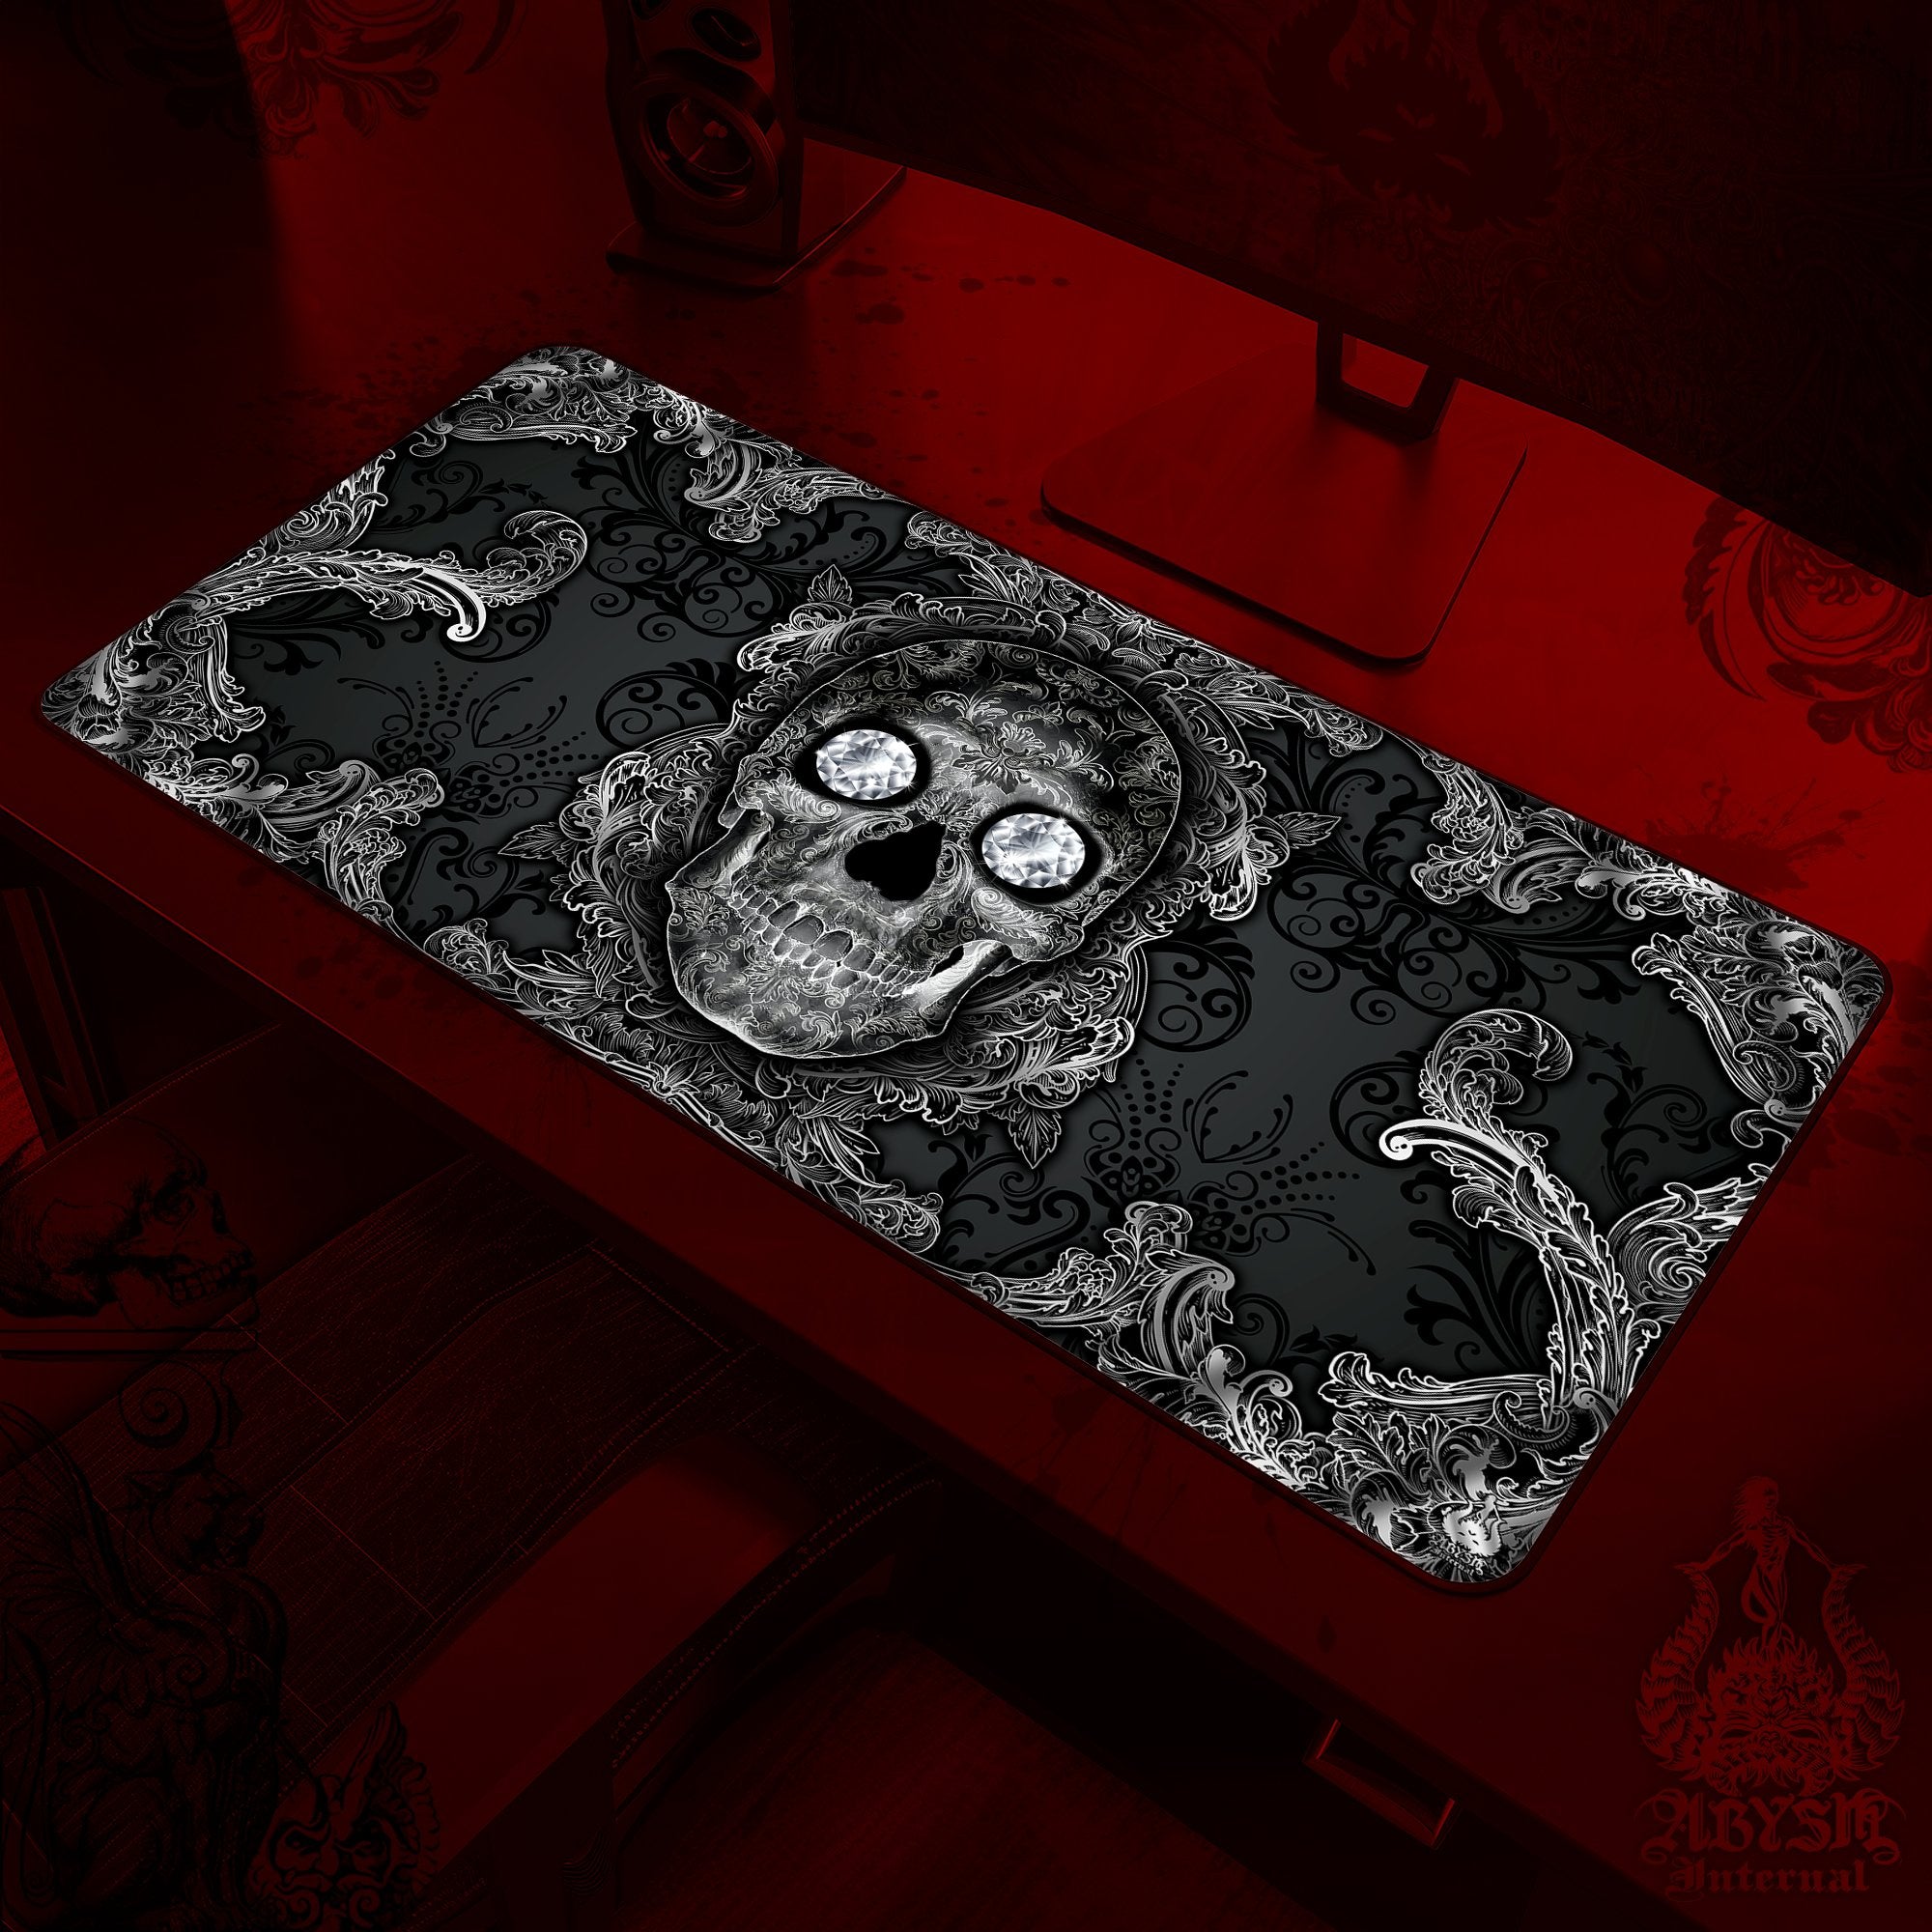 Gothic Gaming Desk Mat, Skull Mouse Pad, Nu Goth Table Protector Cover, Dark Workpad, Art Print - Abysm Internal